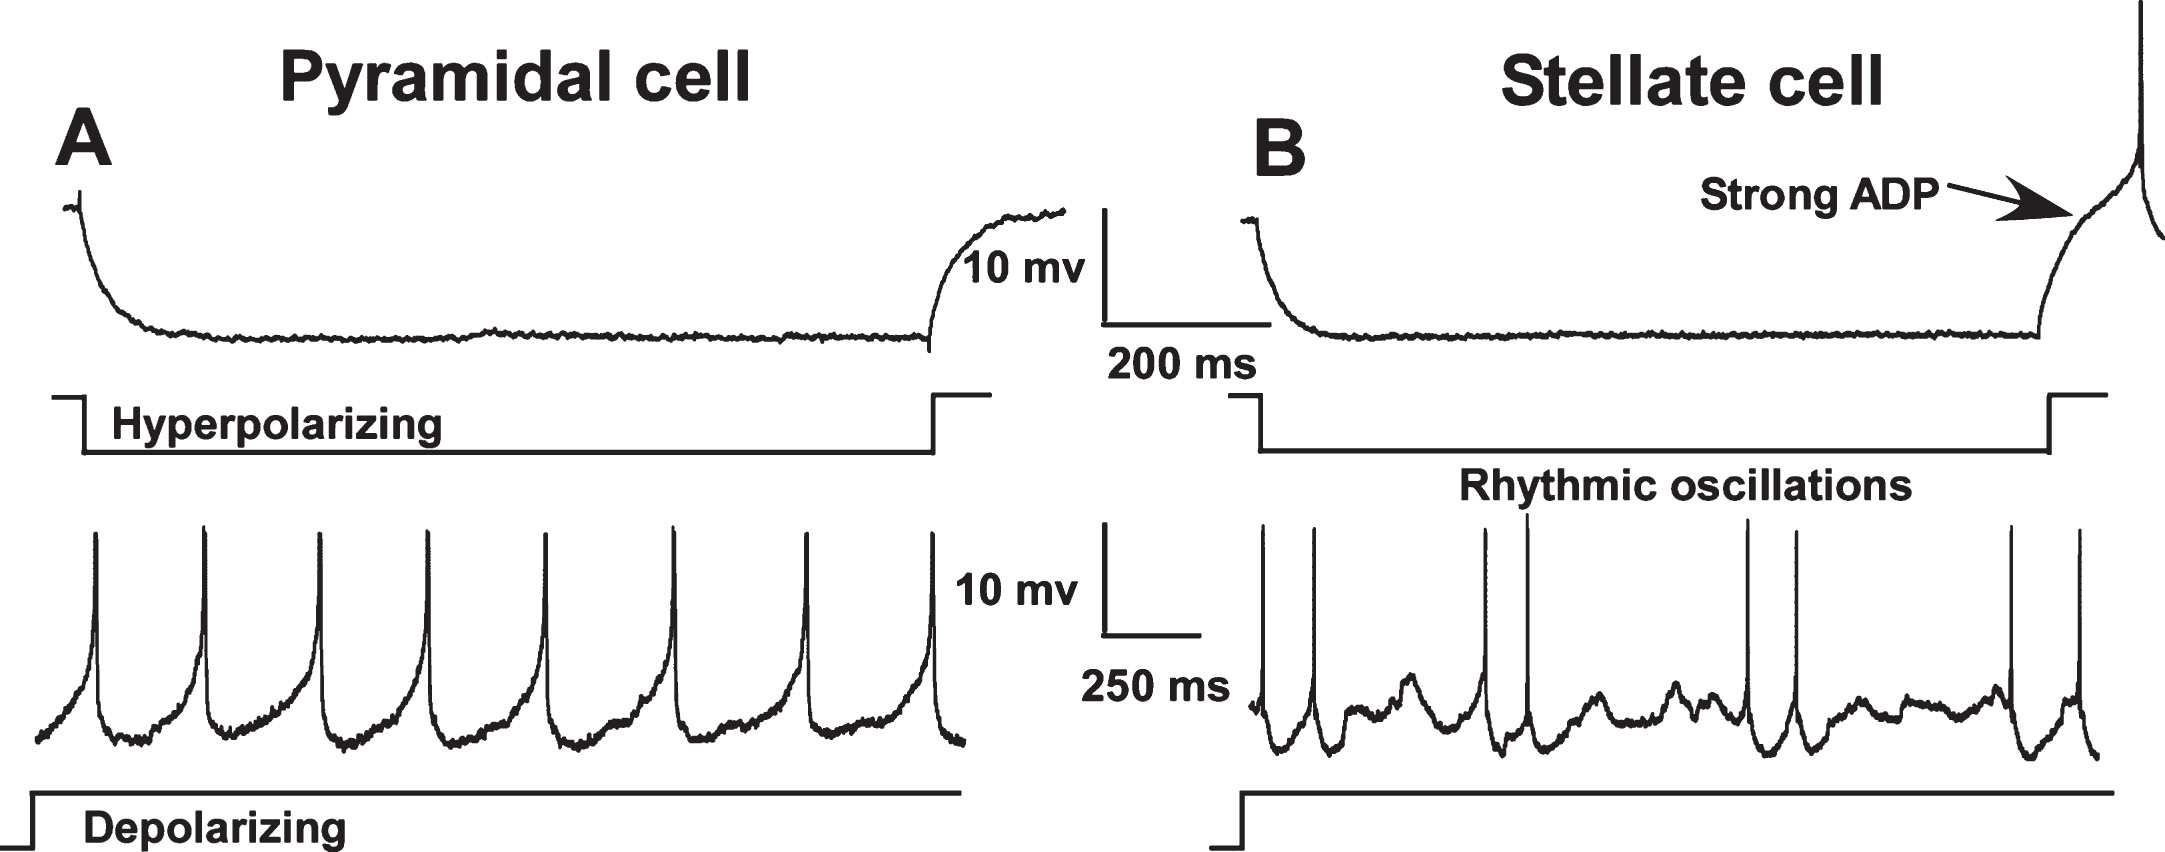 Electrophysiological differences between pyramidal (A) and stellate cells (B) in the medial entorhinal cortex (MEC). In contrast to pyramidal cells, stellate and other non-pyramidal cells exhibit a pronounced afterdepolarization (ADP) following repolarization from a hyperpolarizing pulse and show rhythmic oscillations during sustained depolarization. Neuronal types were distinguished using these characteristics and only pyramidal-like cells were included in this study. (Note: action potentials have been truncated).